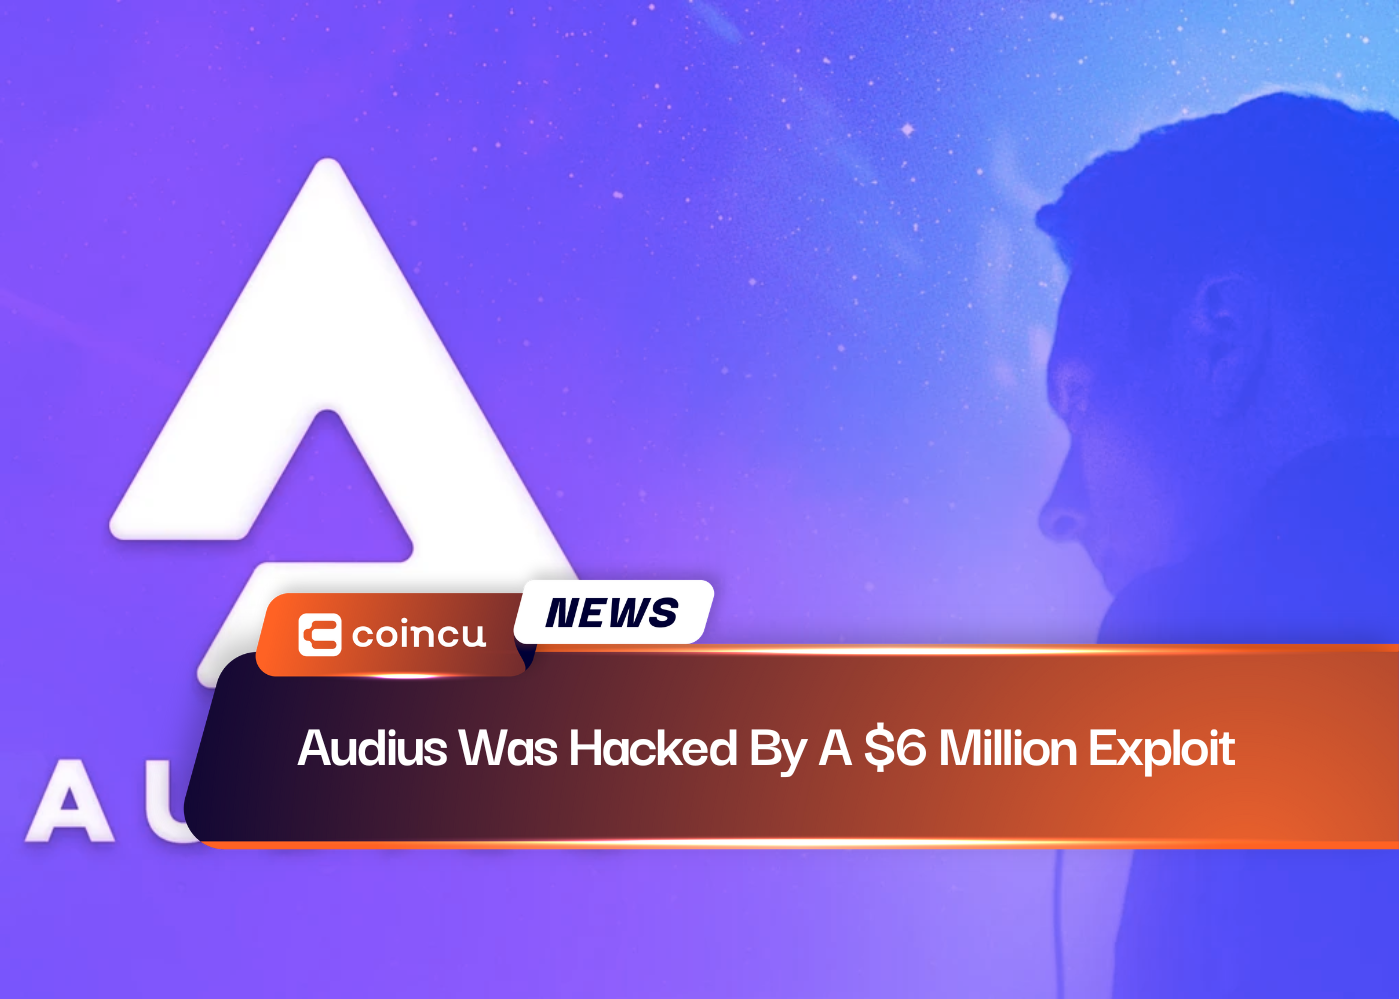 Audius Was Hacked By A $6 Million Exploit